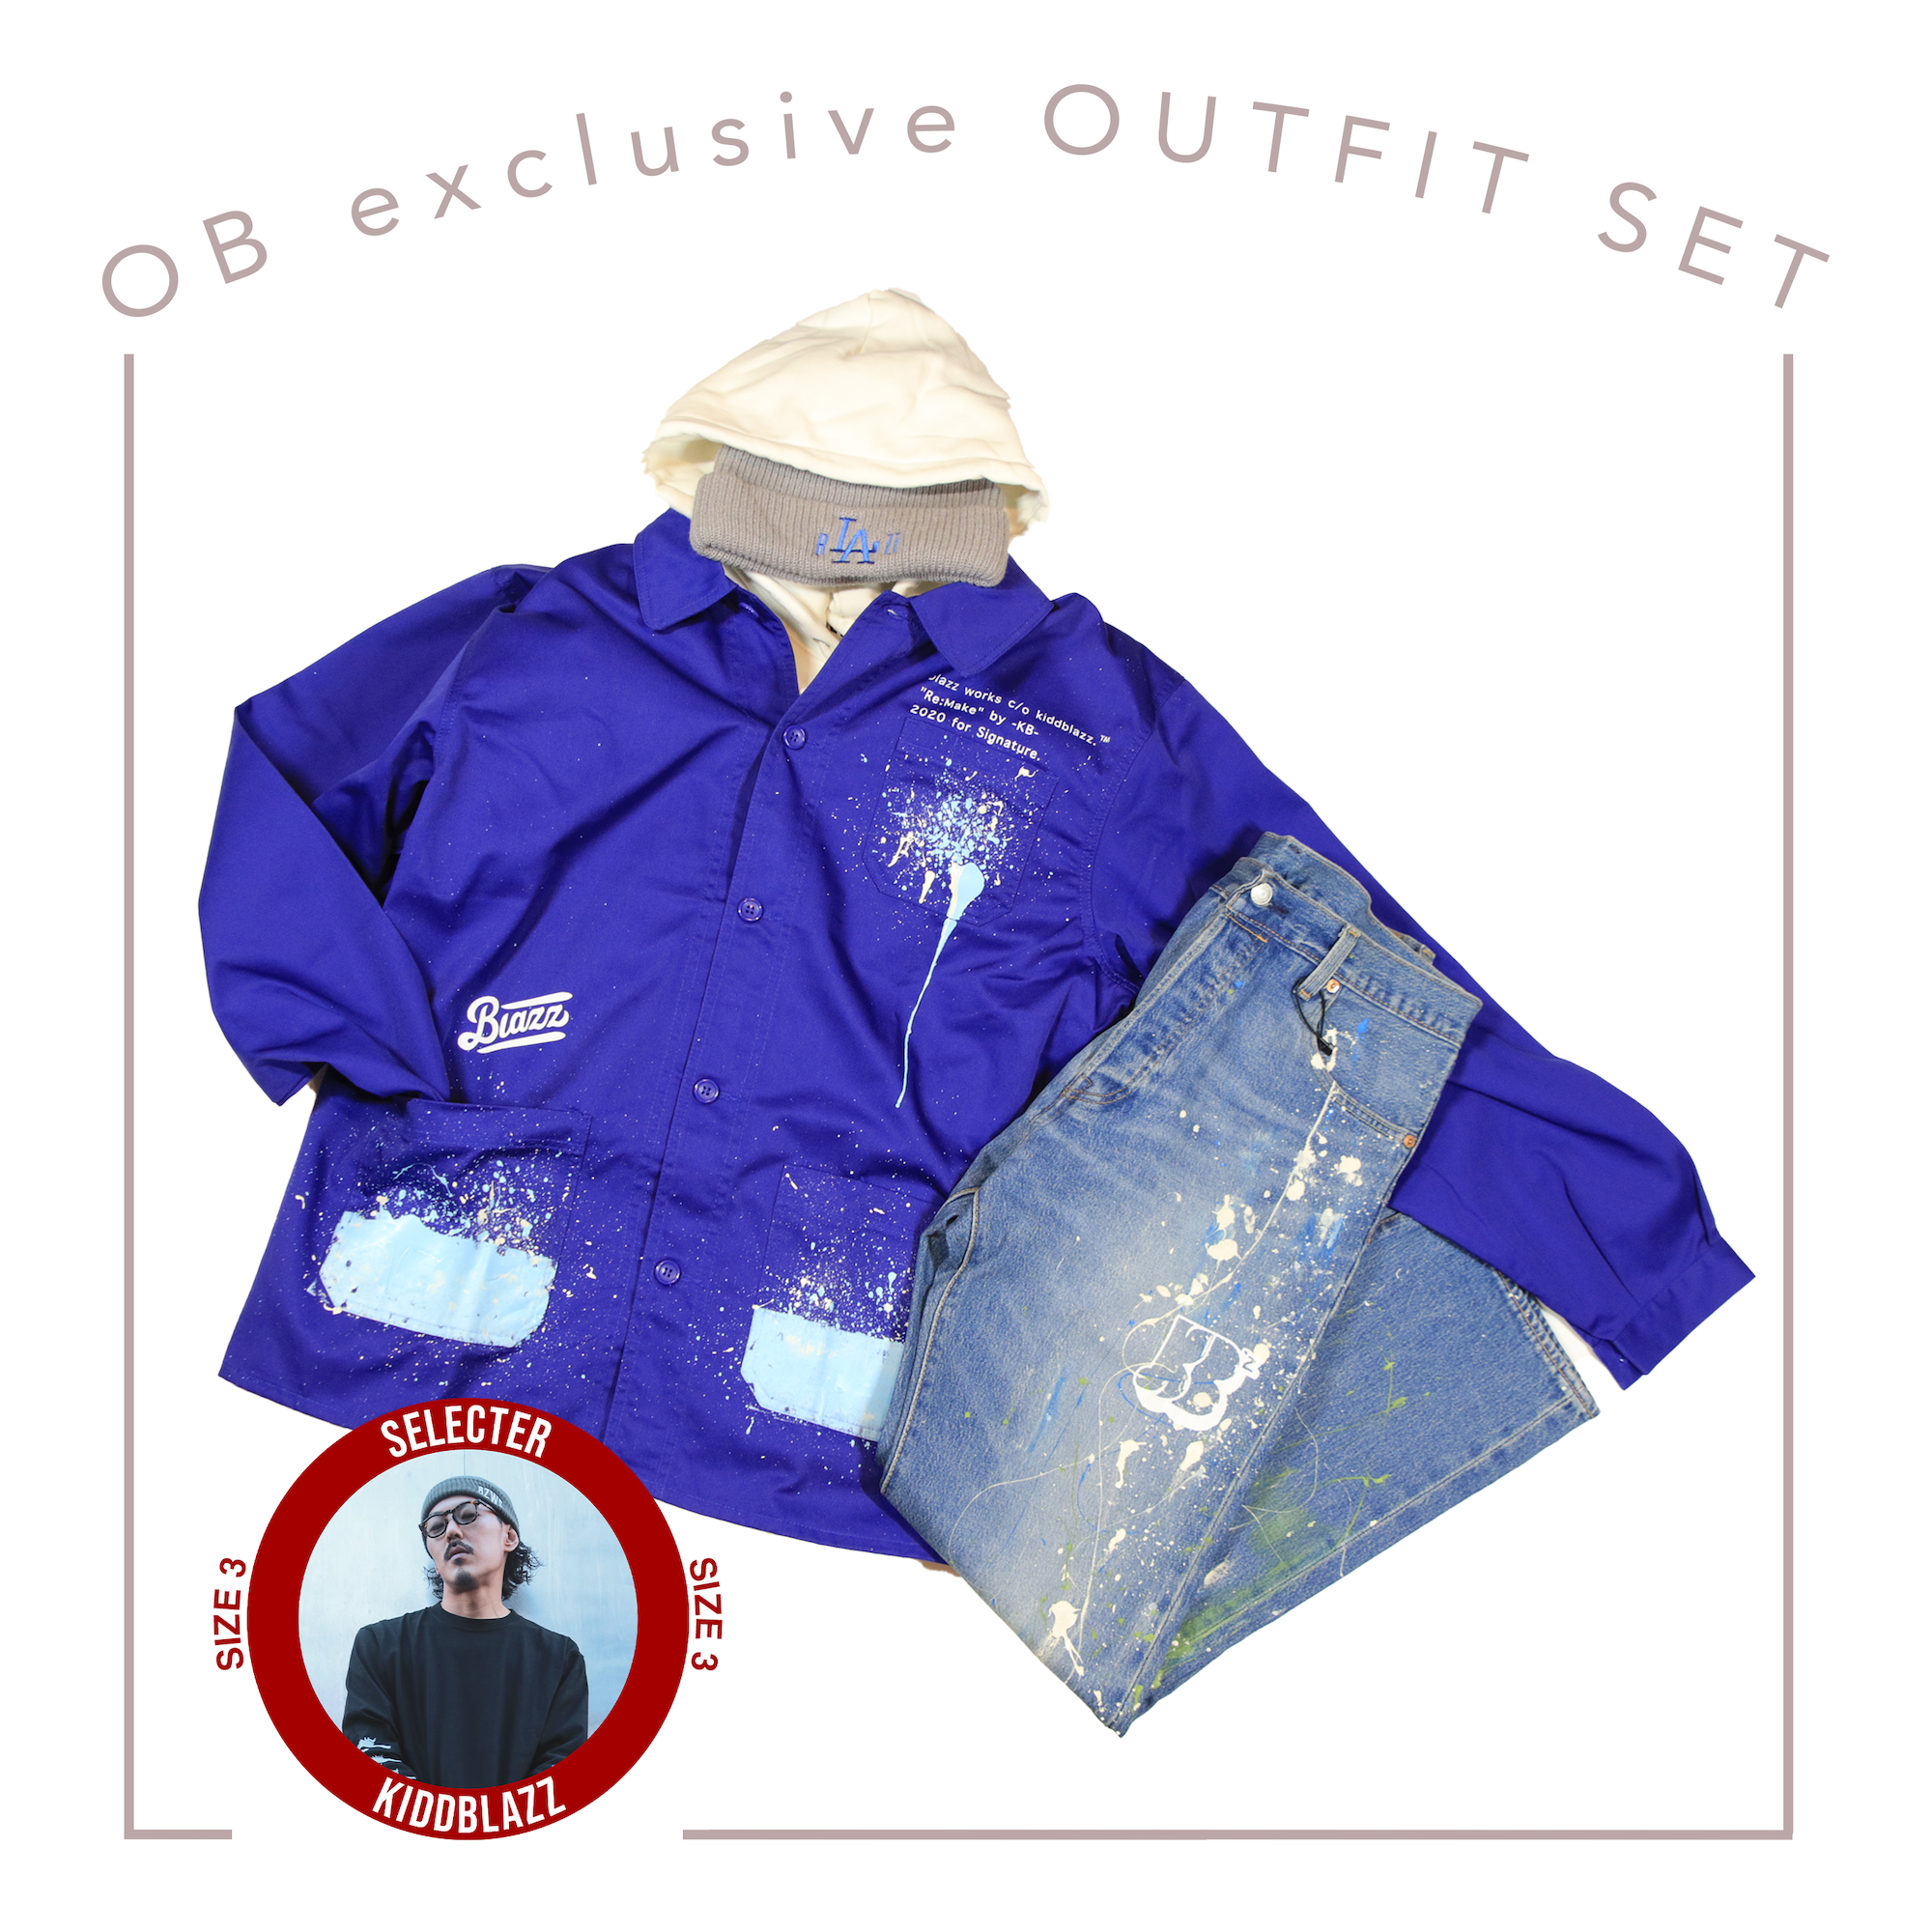 【OB Exclusive Outfit SET】OFFICE BLAZZ企画START!!